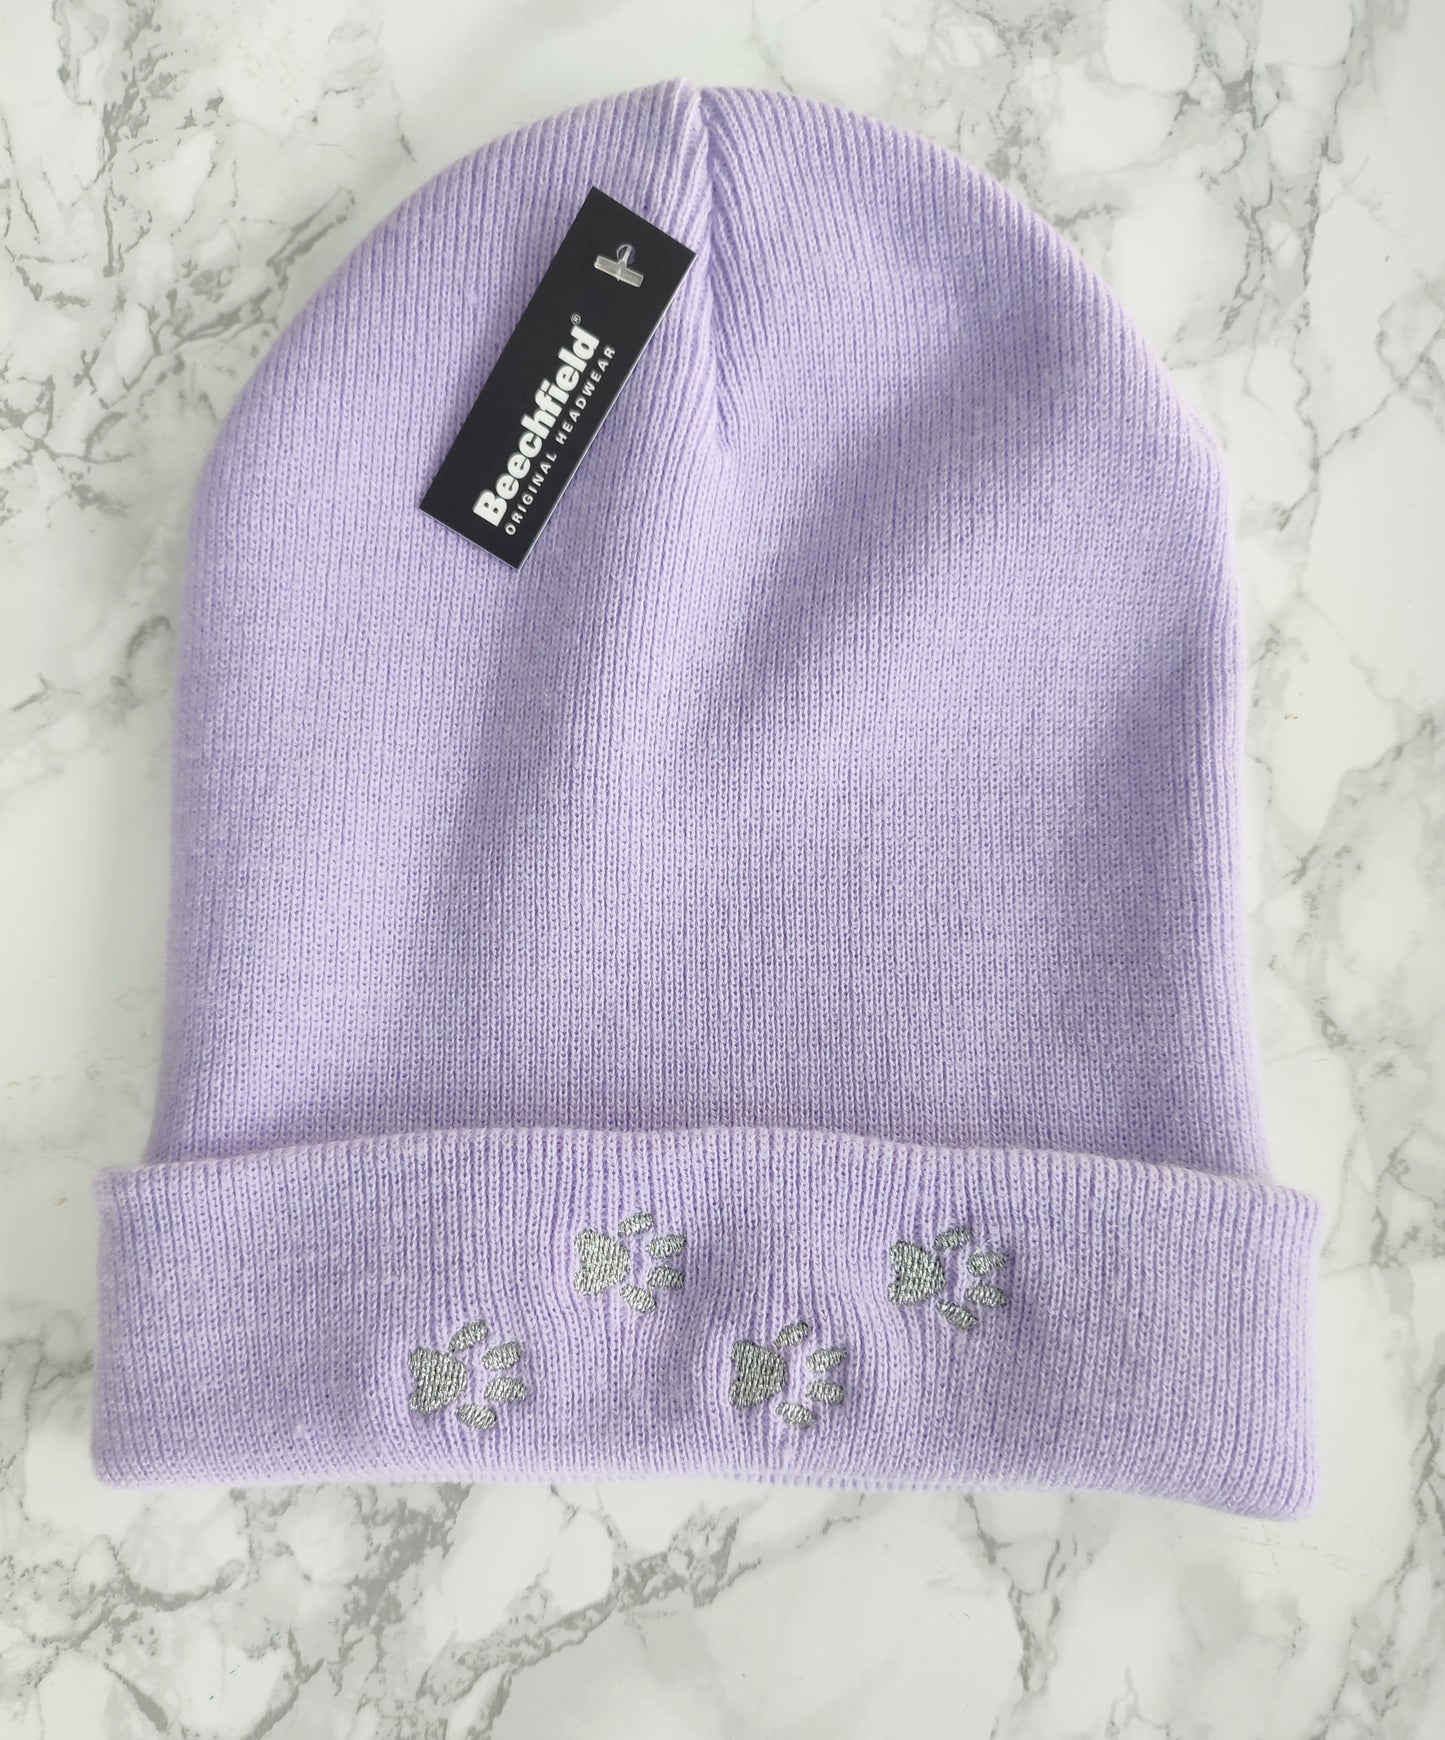 Embroidered pawprint beanie hats -6 colours available